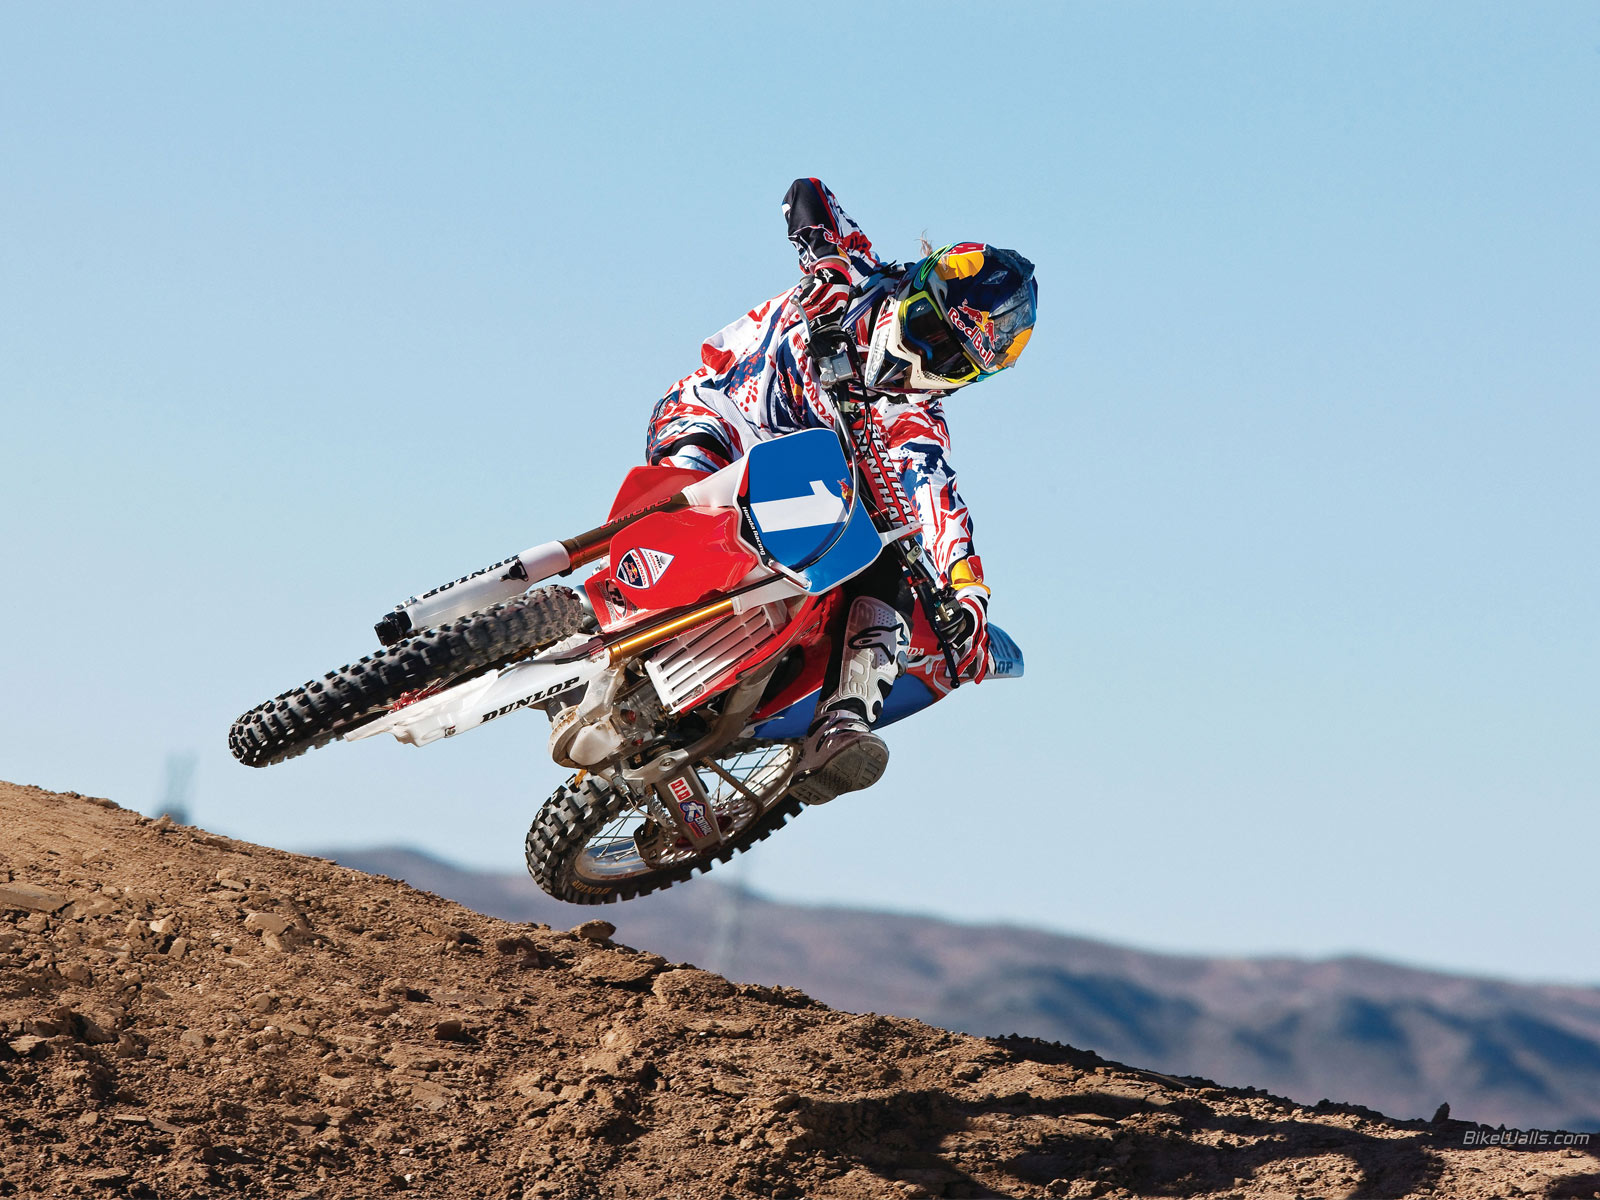 Download High quality Motocross wallpaper / Sports / 1600x1200